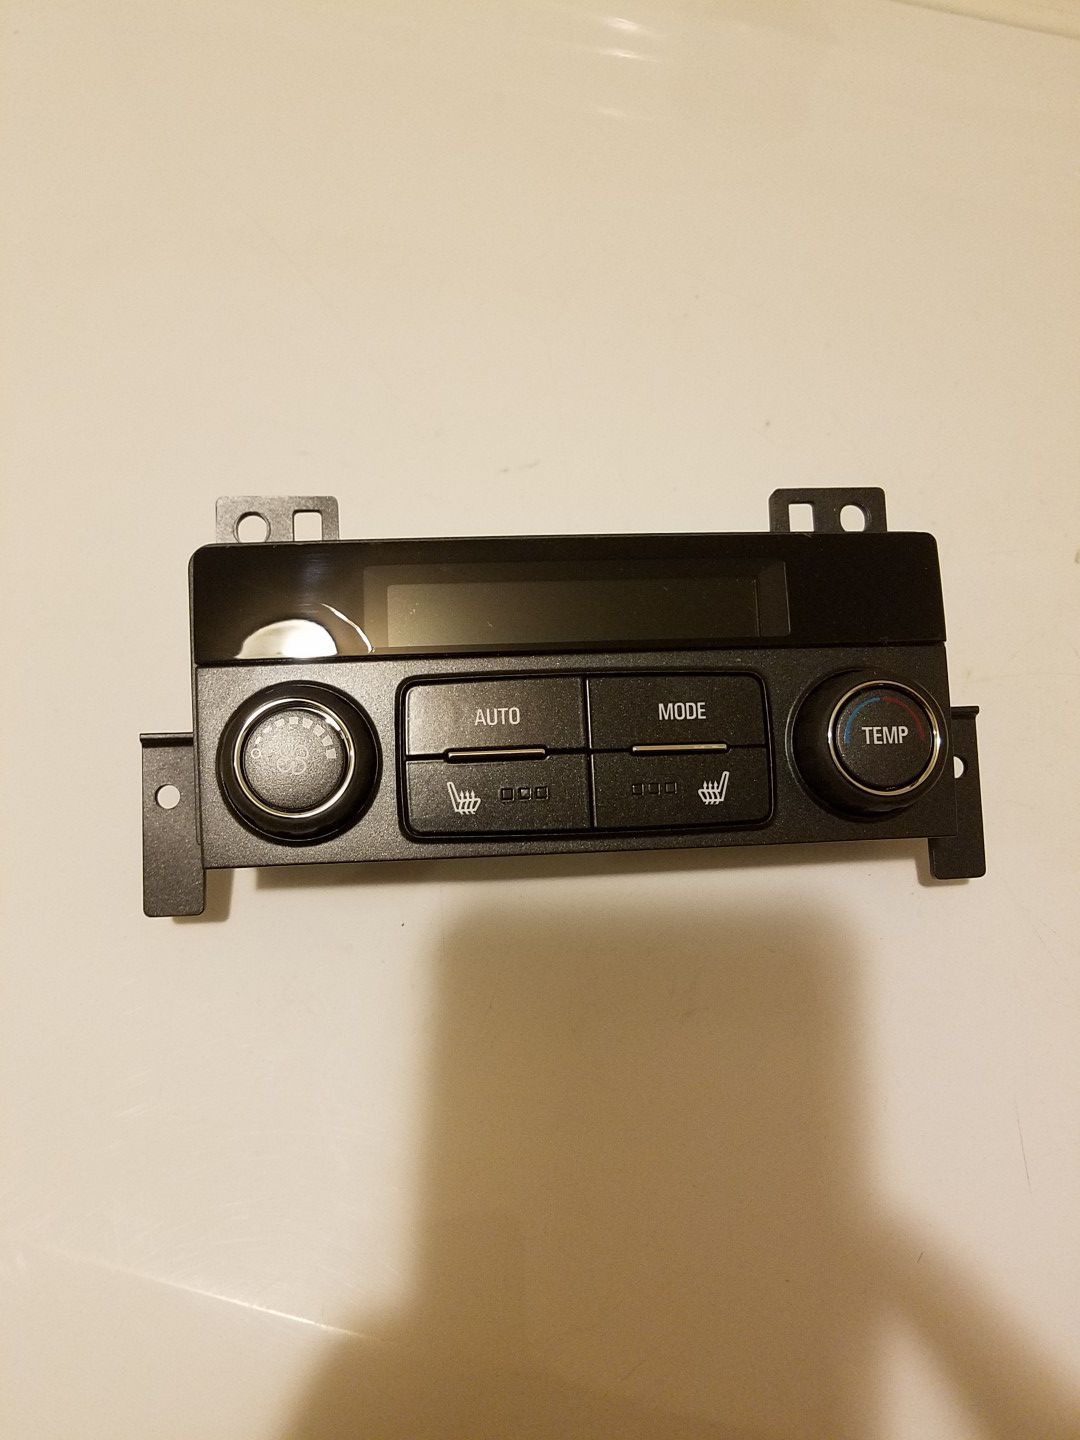 Chevy Tahoe Rear AC control